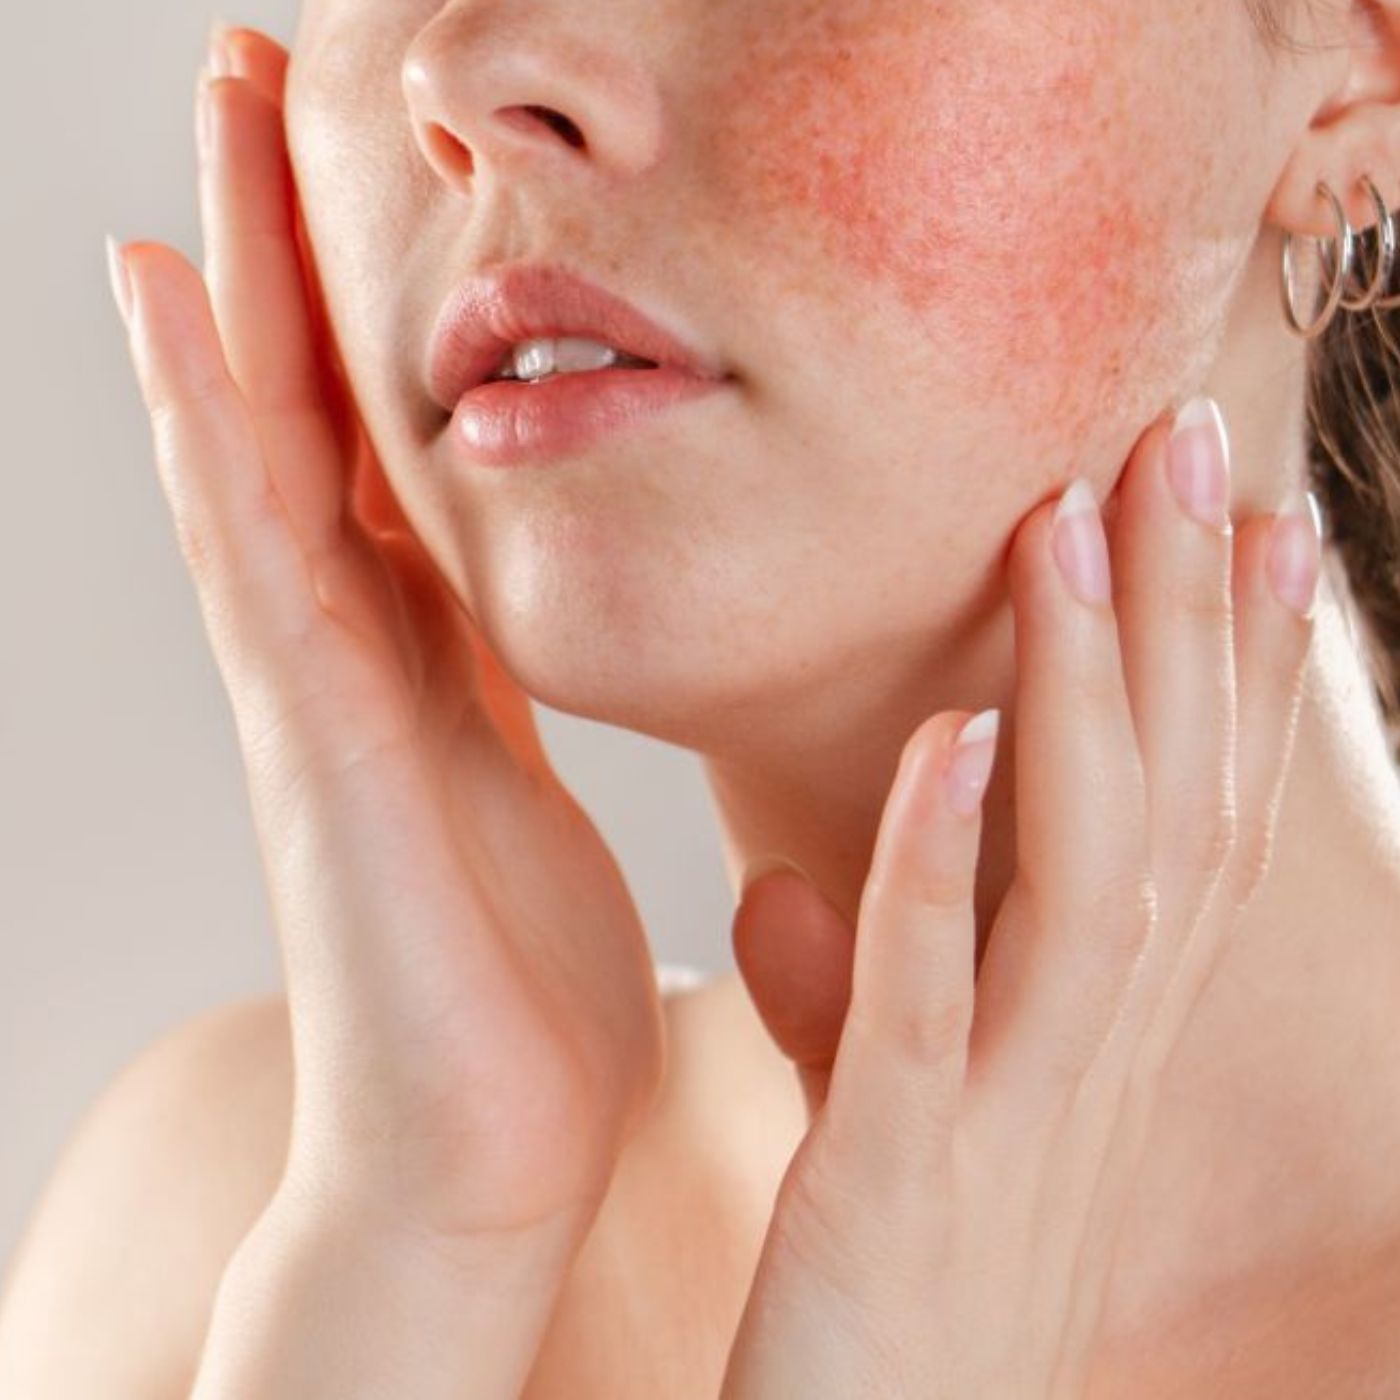 What is rosacea and how can you treat it?